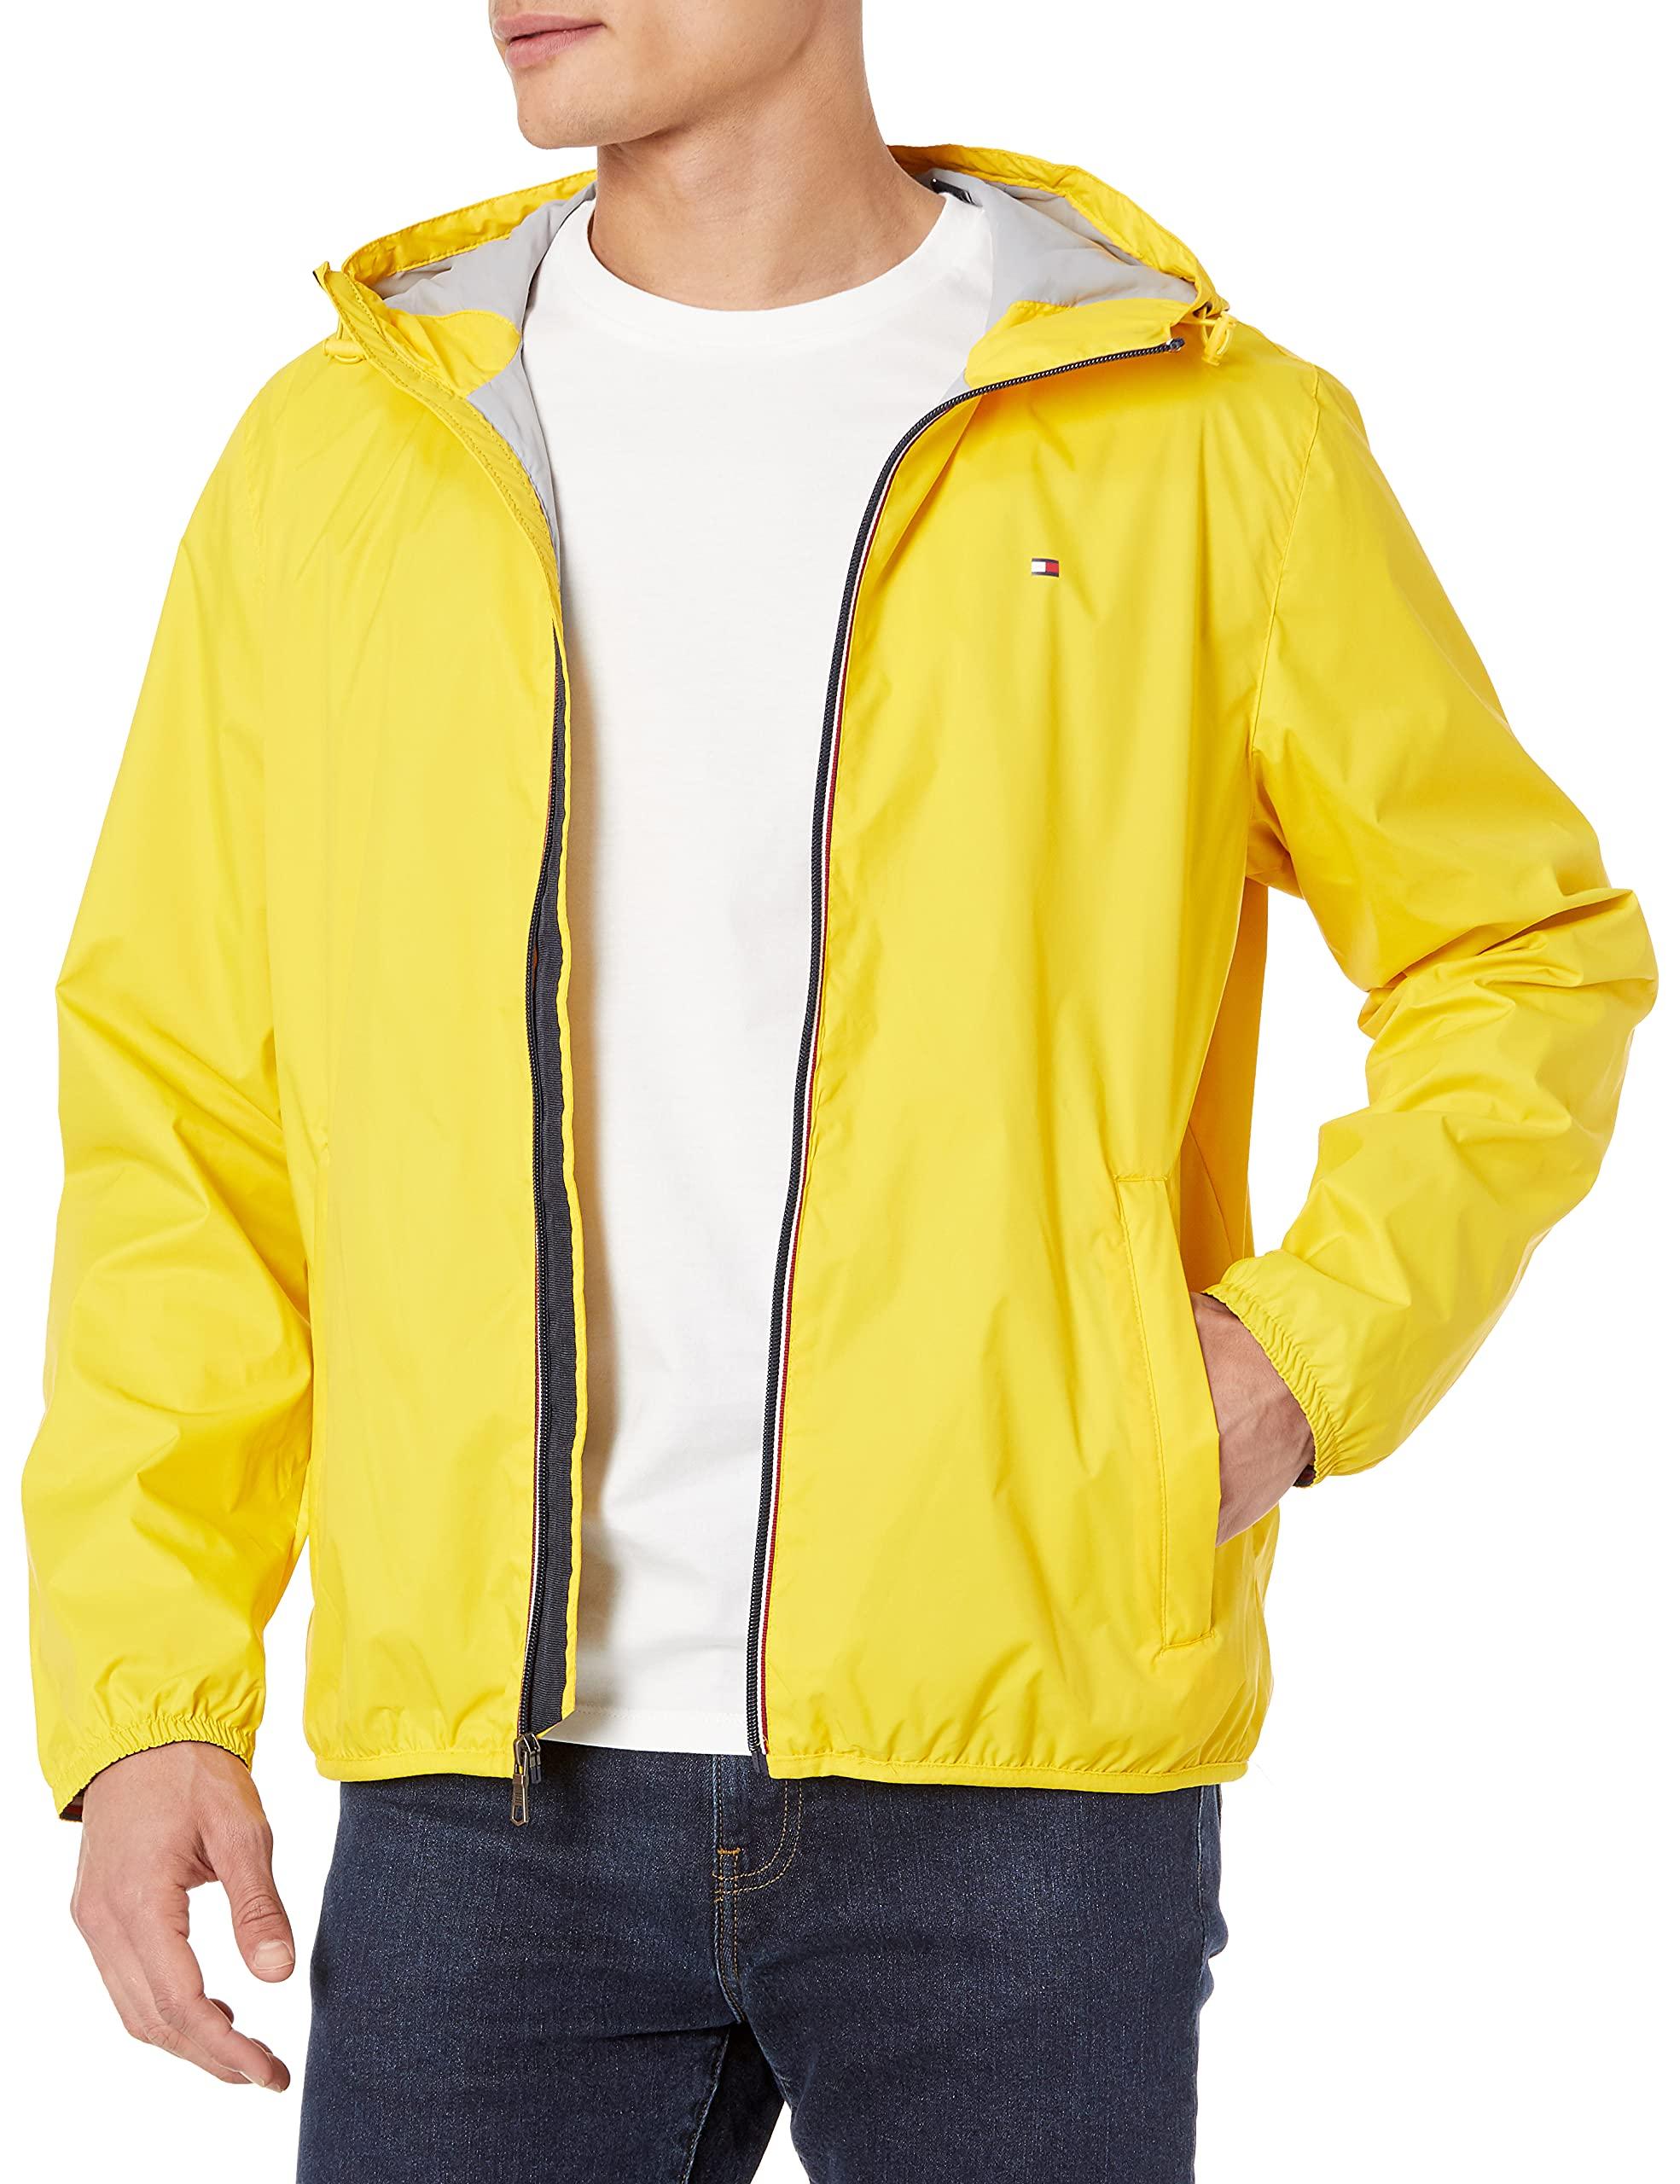 Tommy Hilfiger Synthetic Lightweight Active Water Resistant Hooded Rain  Jacket in Yellow for Men - Save 10% - www.simbasitestesting.com